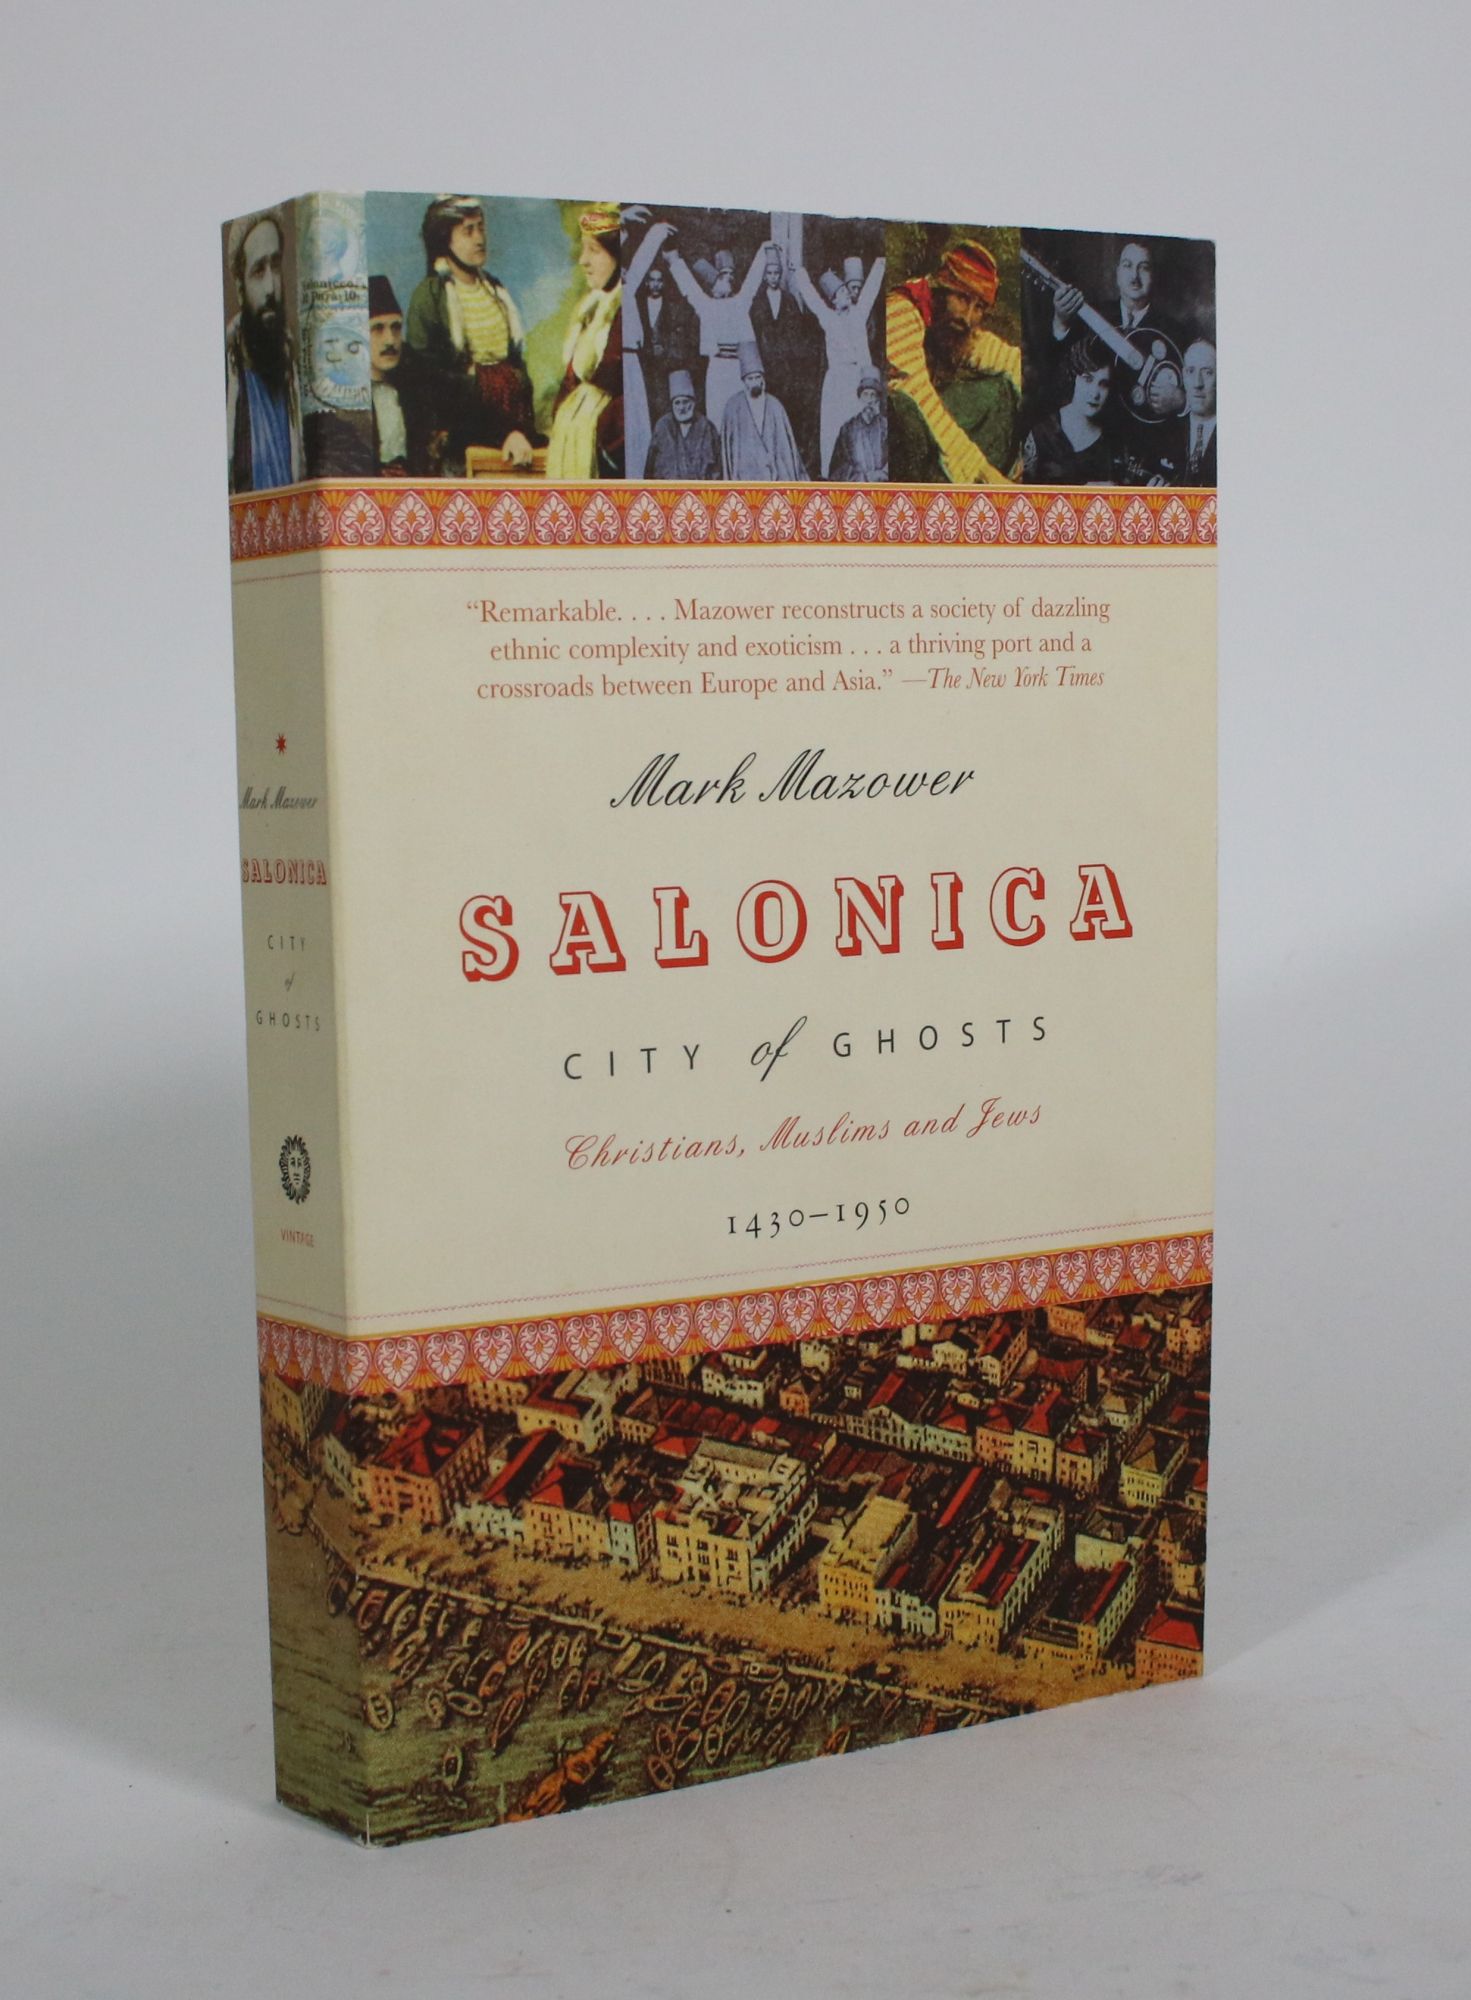 Salonica, City of Ghosts: Christians, Muslims and Jews, 1430-1950 - Mazower, Mark